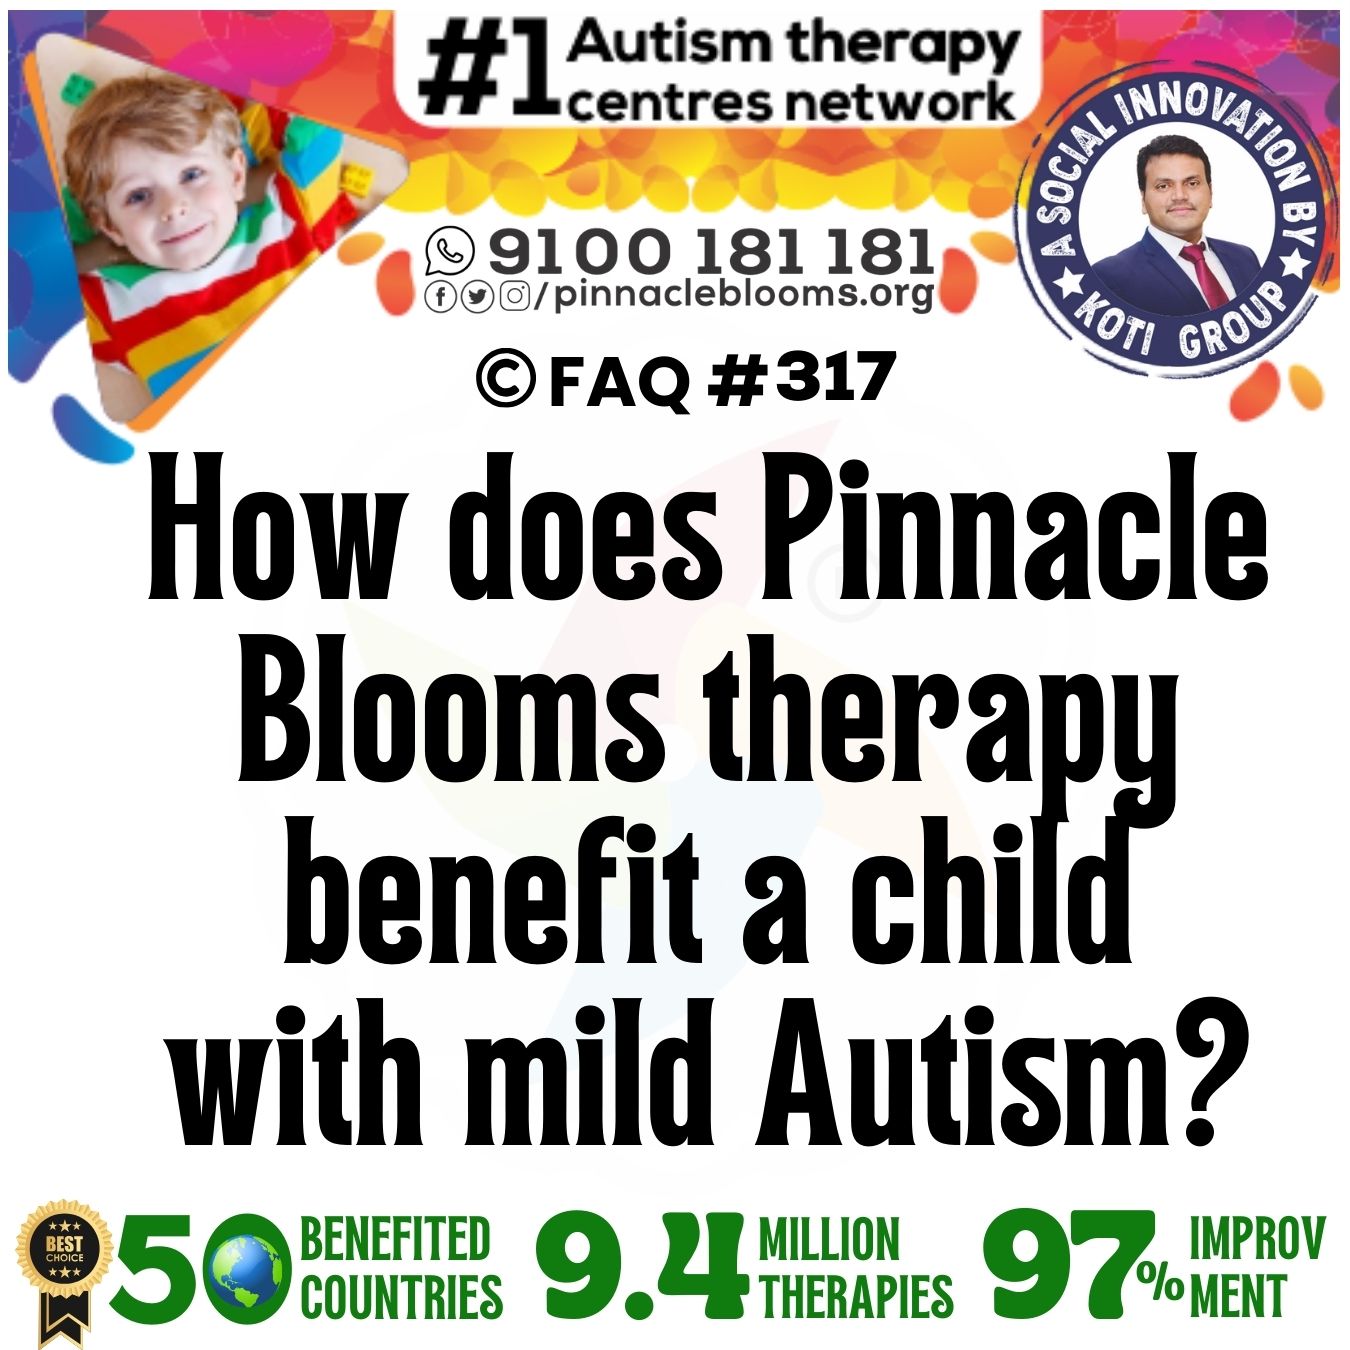 How does Pinnacle Blooms therapy benefit a child with mild Autism?